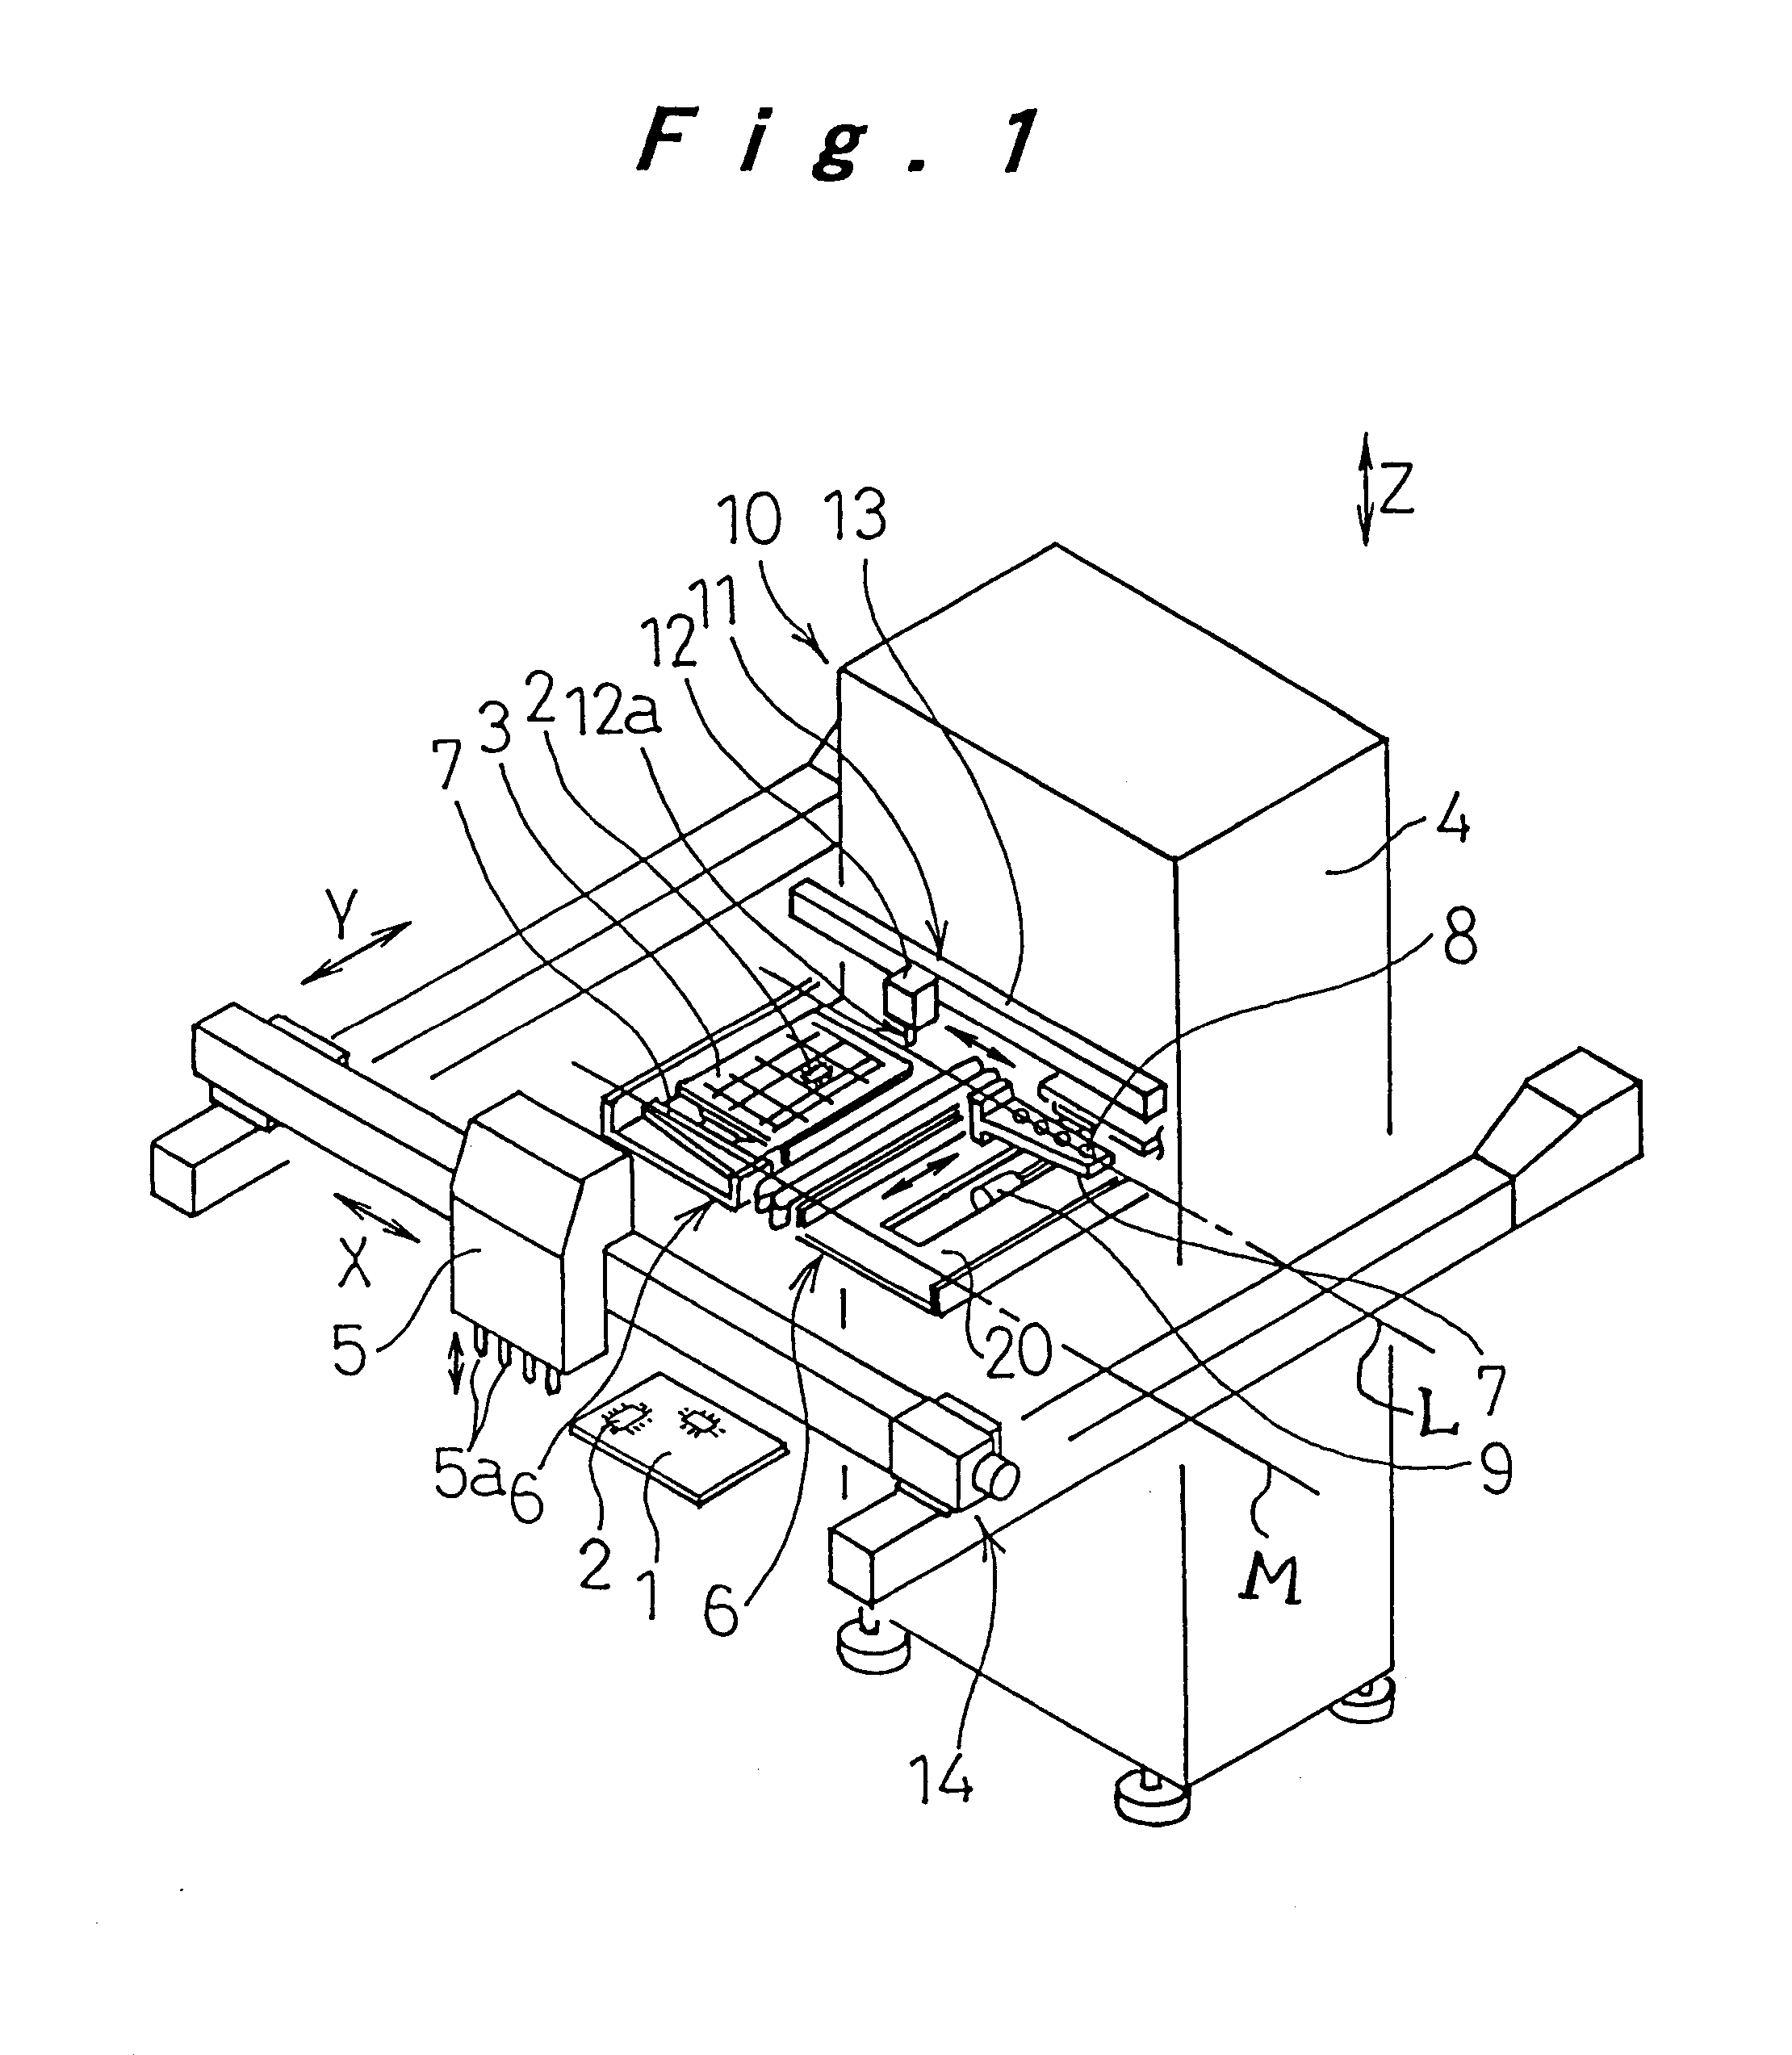 Method and apparatus for mounting electronic components